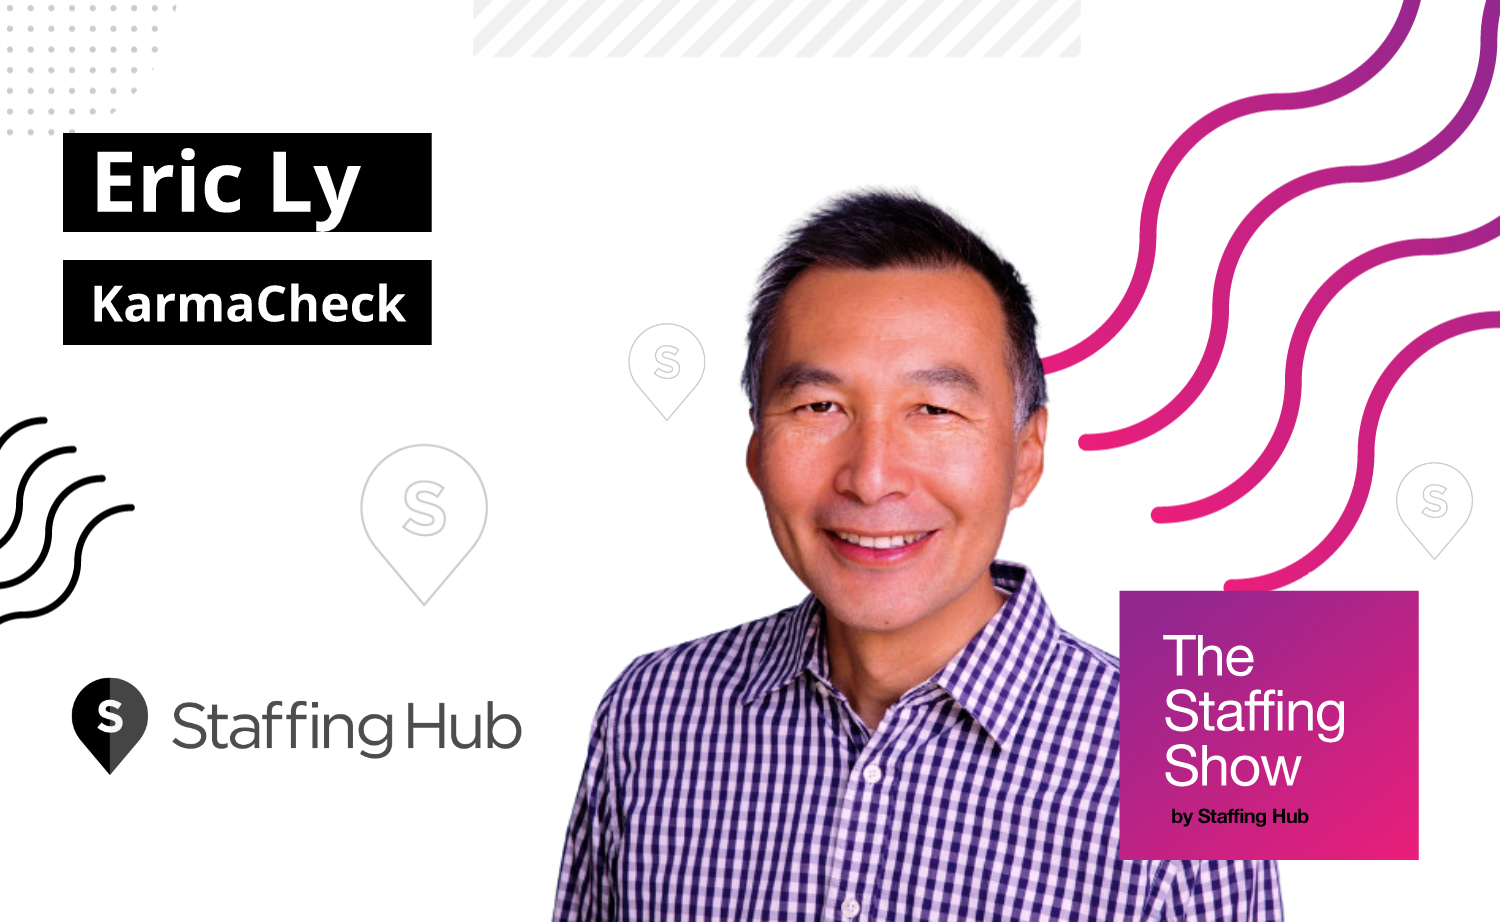 Eric Ly, Co-Founder of KarmaCheck, on a New Approach to Background Checks